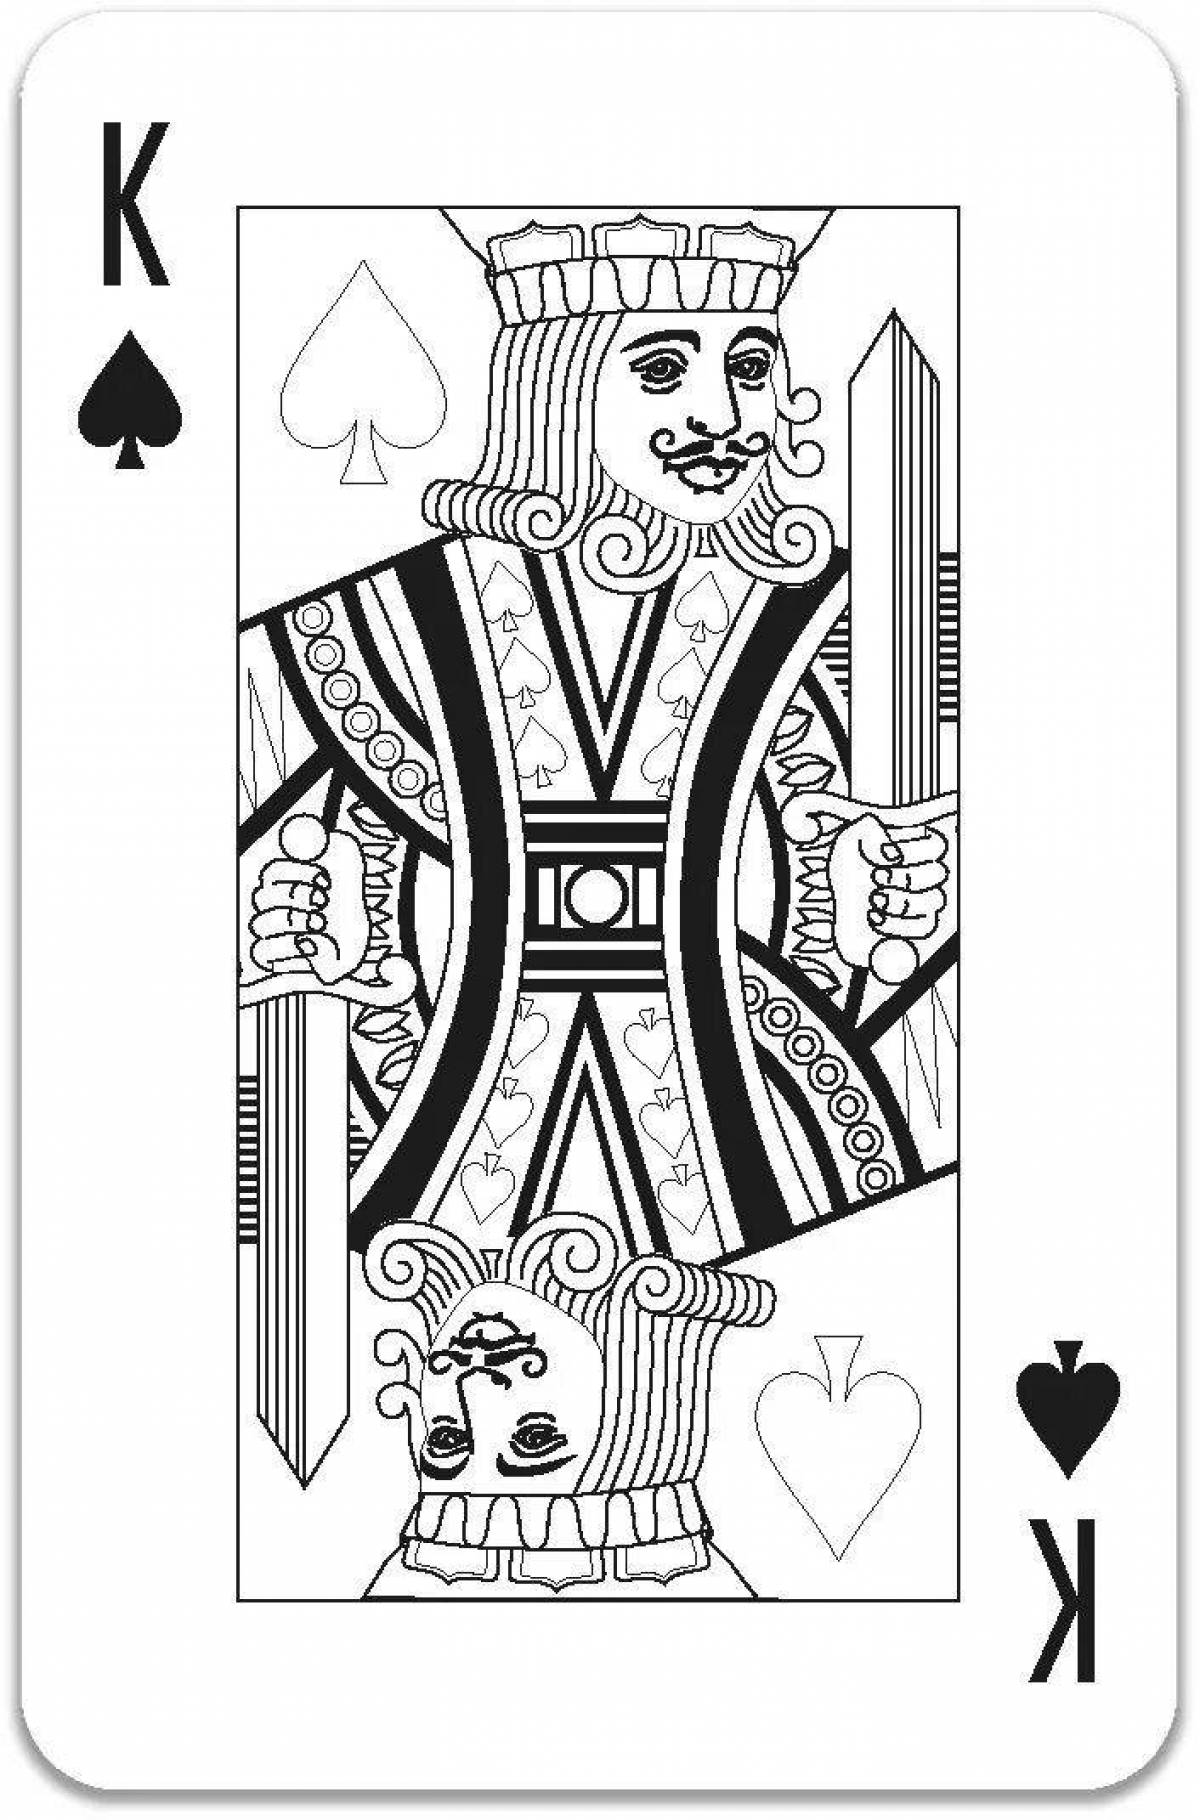 Playing cards #24